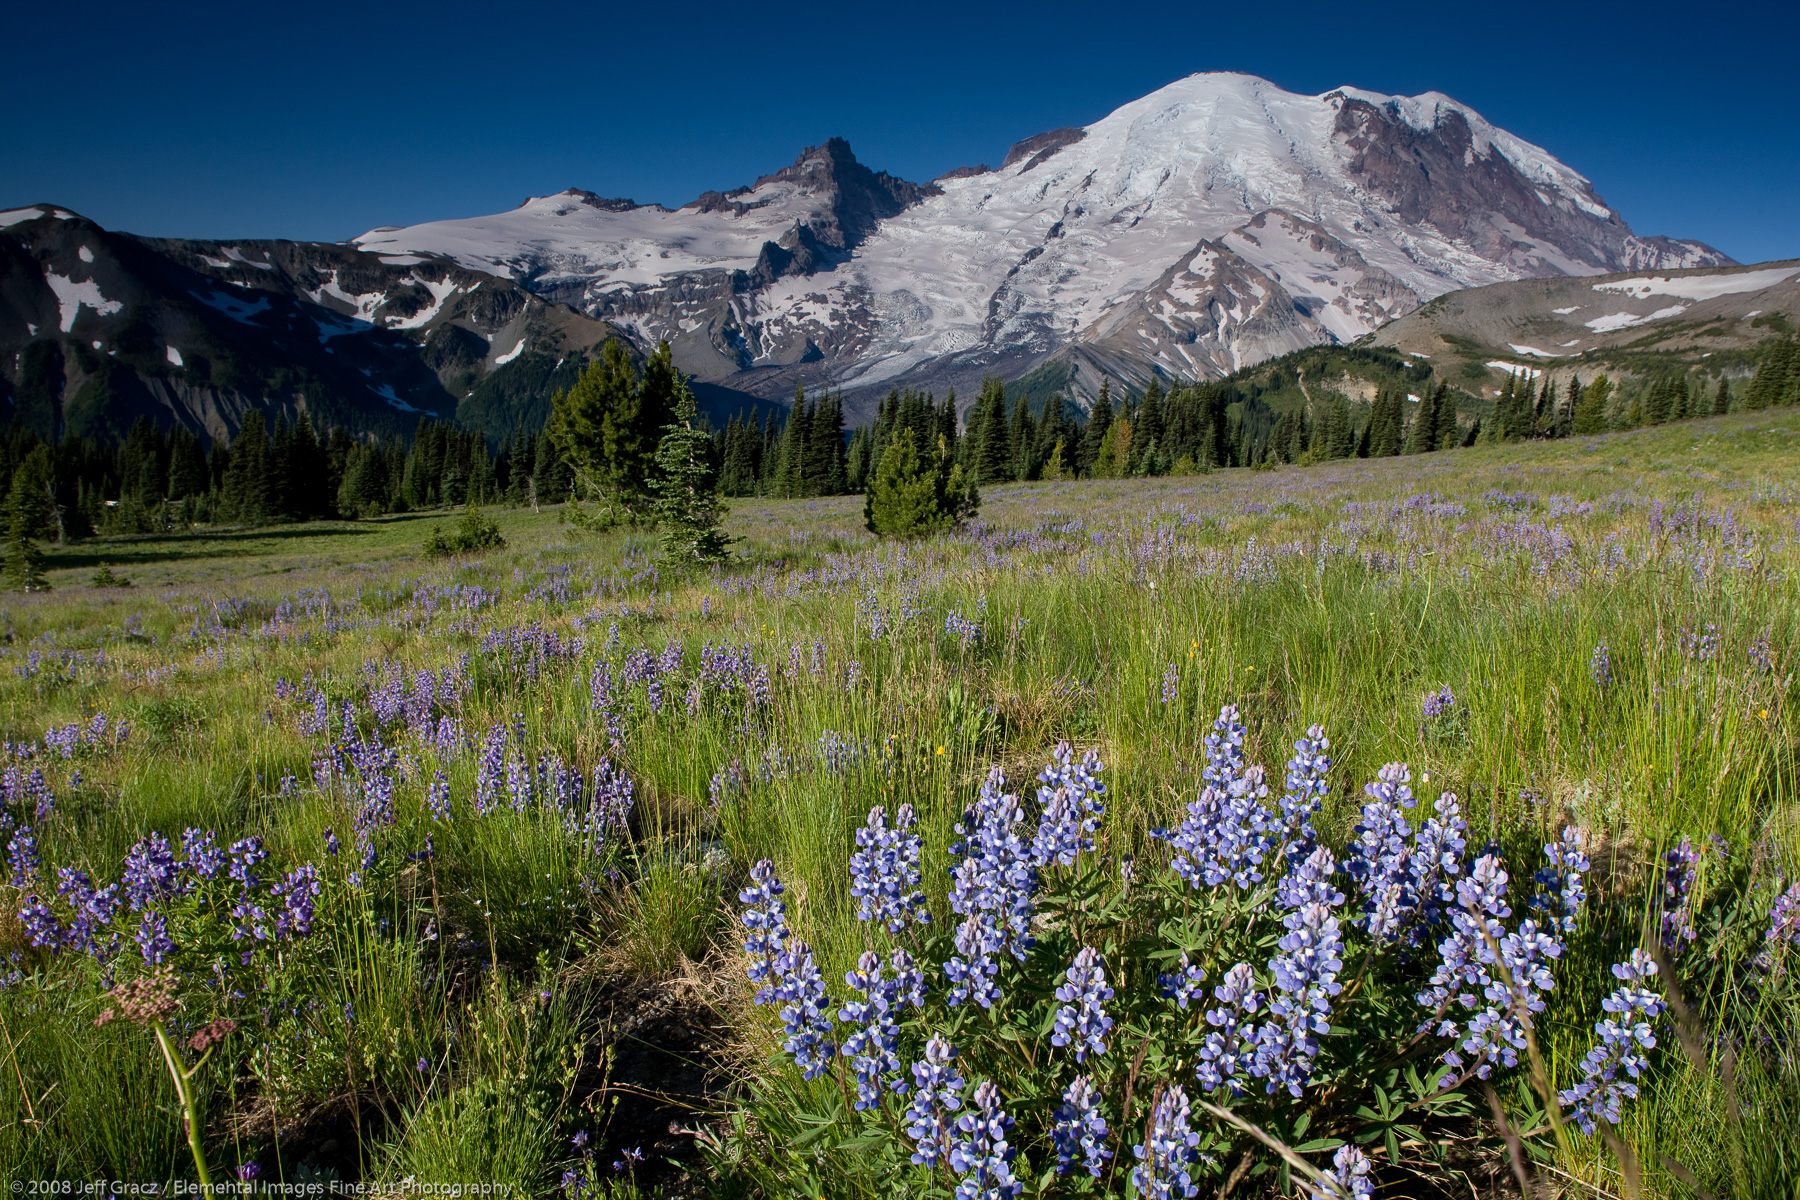 Mt Rainier from sunrise meadows with lupine | Mount Rainier National Park | WA | USA - © © 2008 Jeff Gracz / Elemental Images Fine Art Photography - All Rights Reserved Worldwide